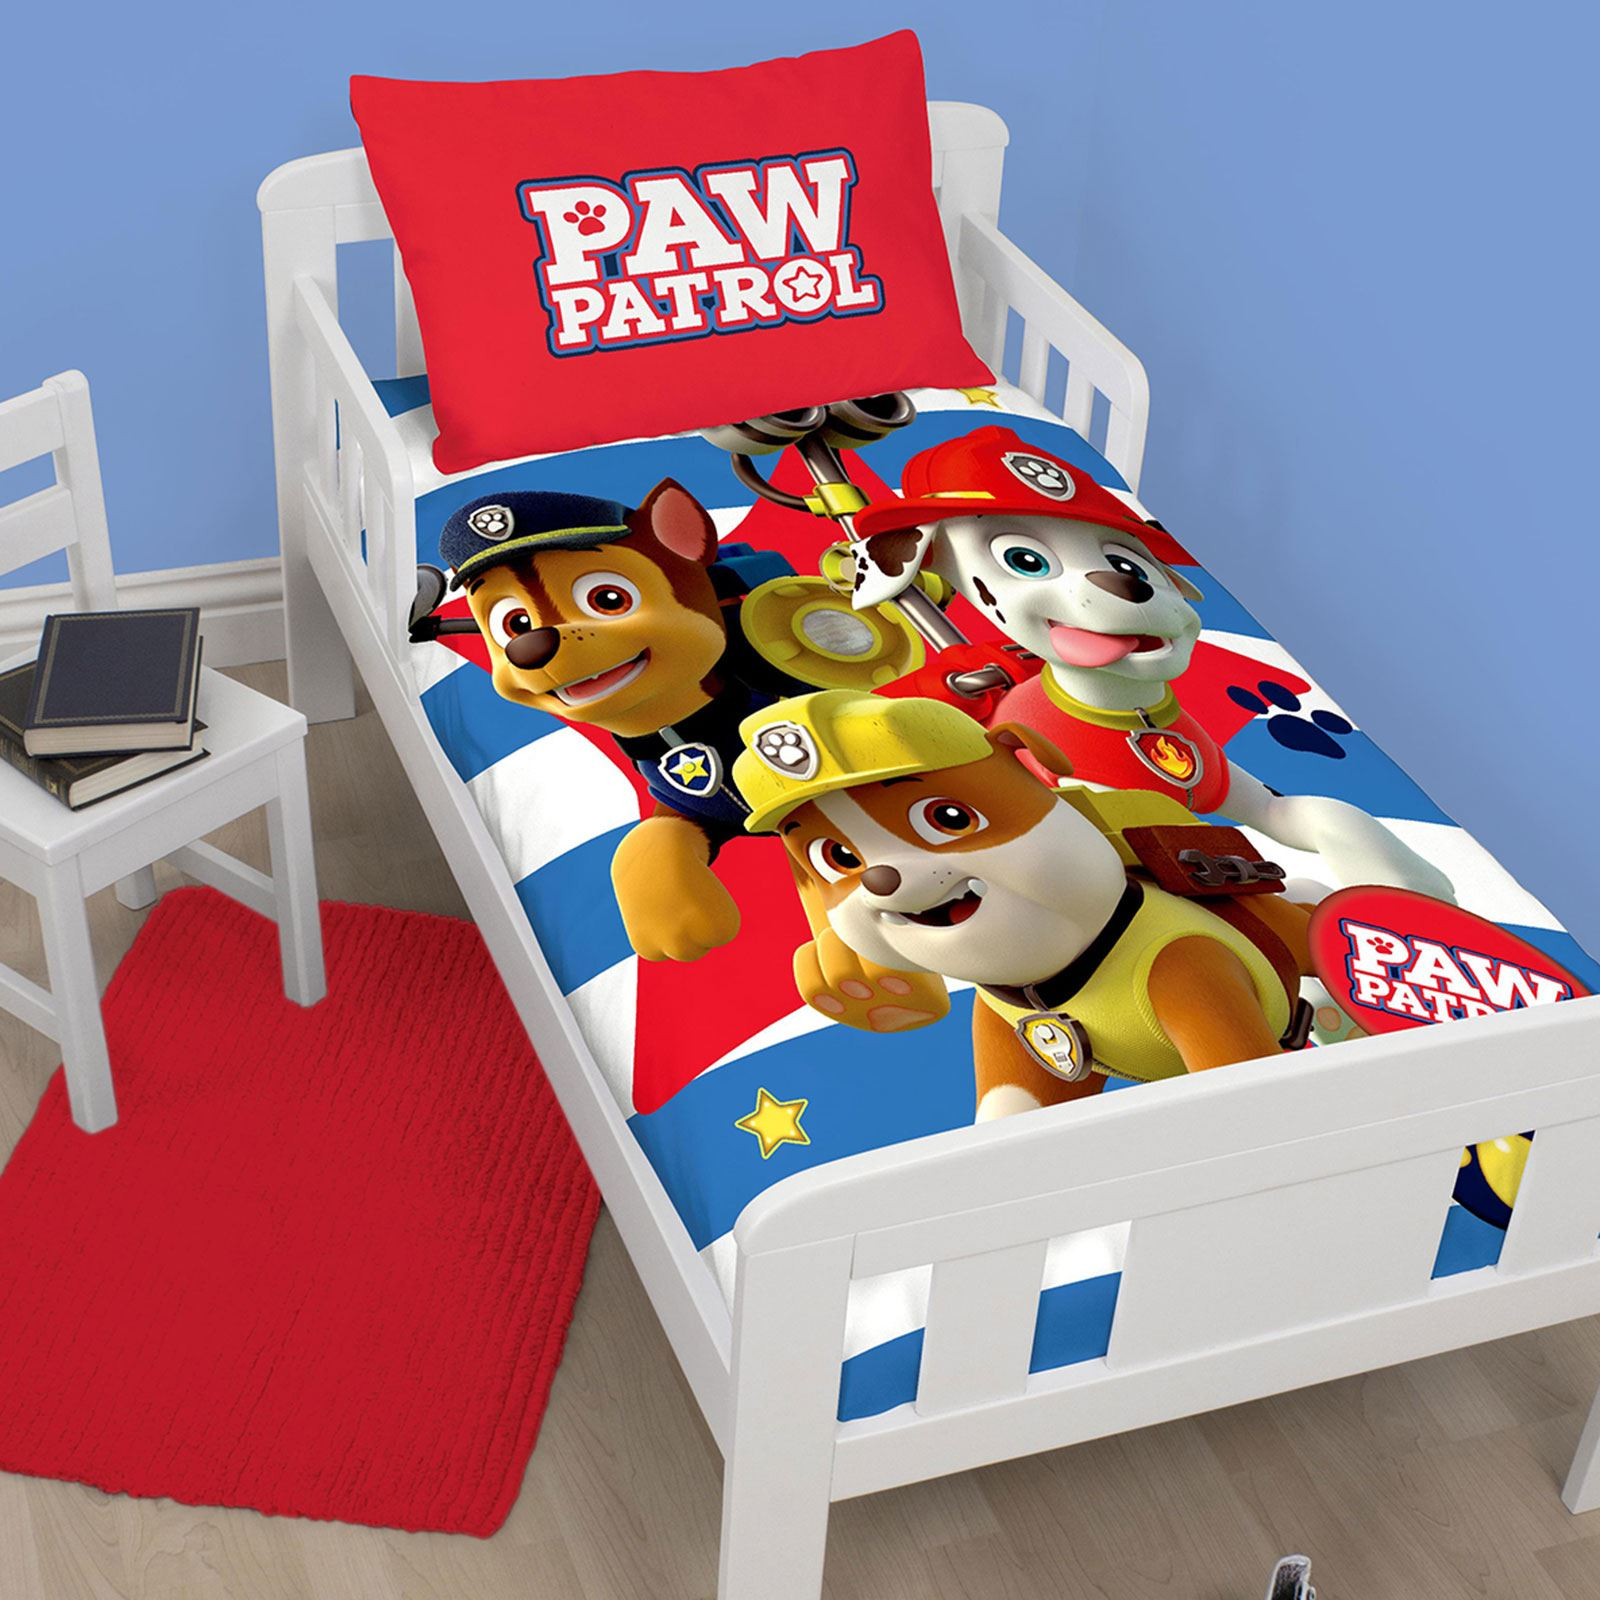 Details About Paw Patrol Official Duvet Cover Sets Bedding Boys Girls Junior Single Double pertaining to dimensions 1600 X 1600